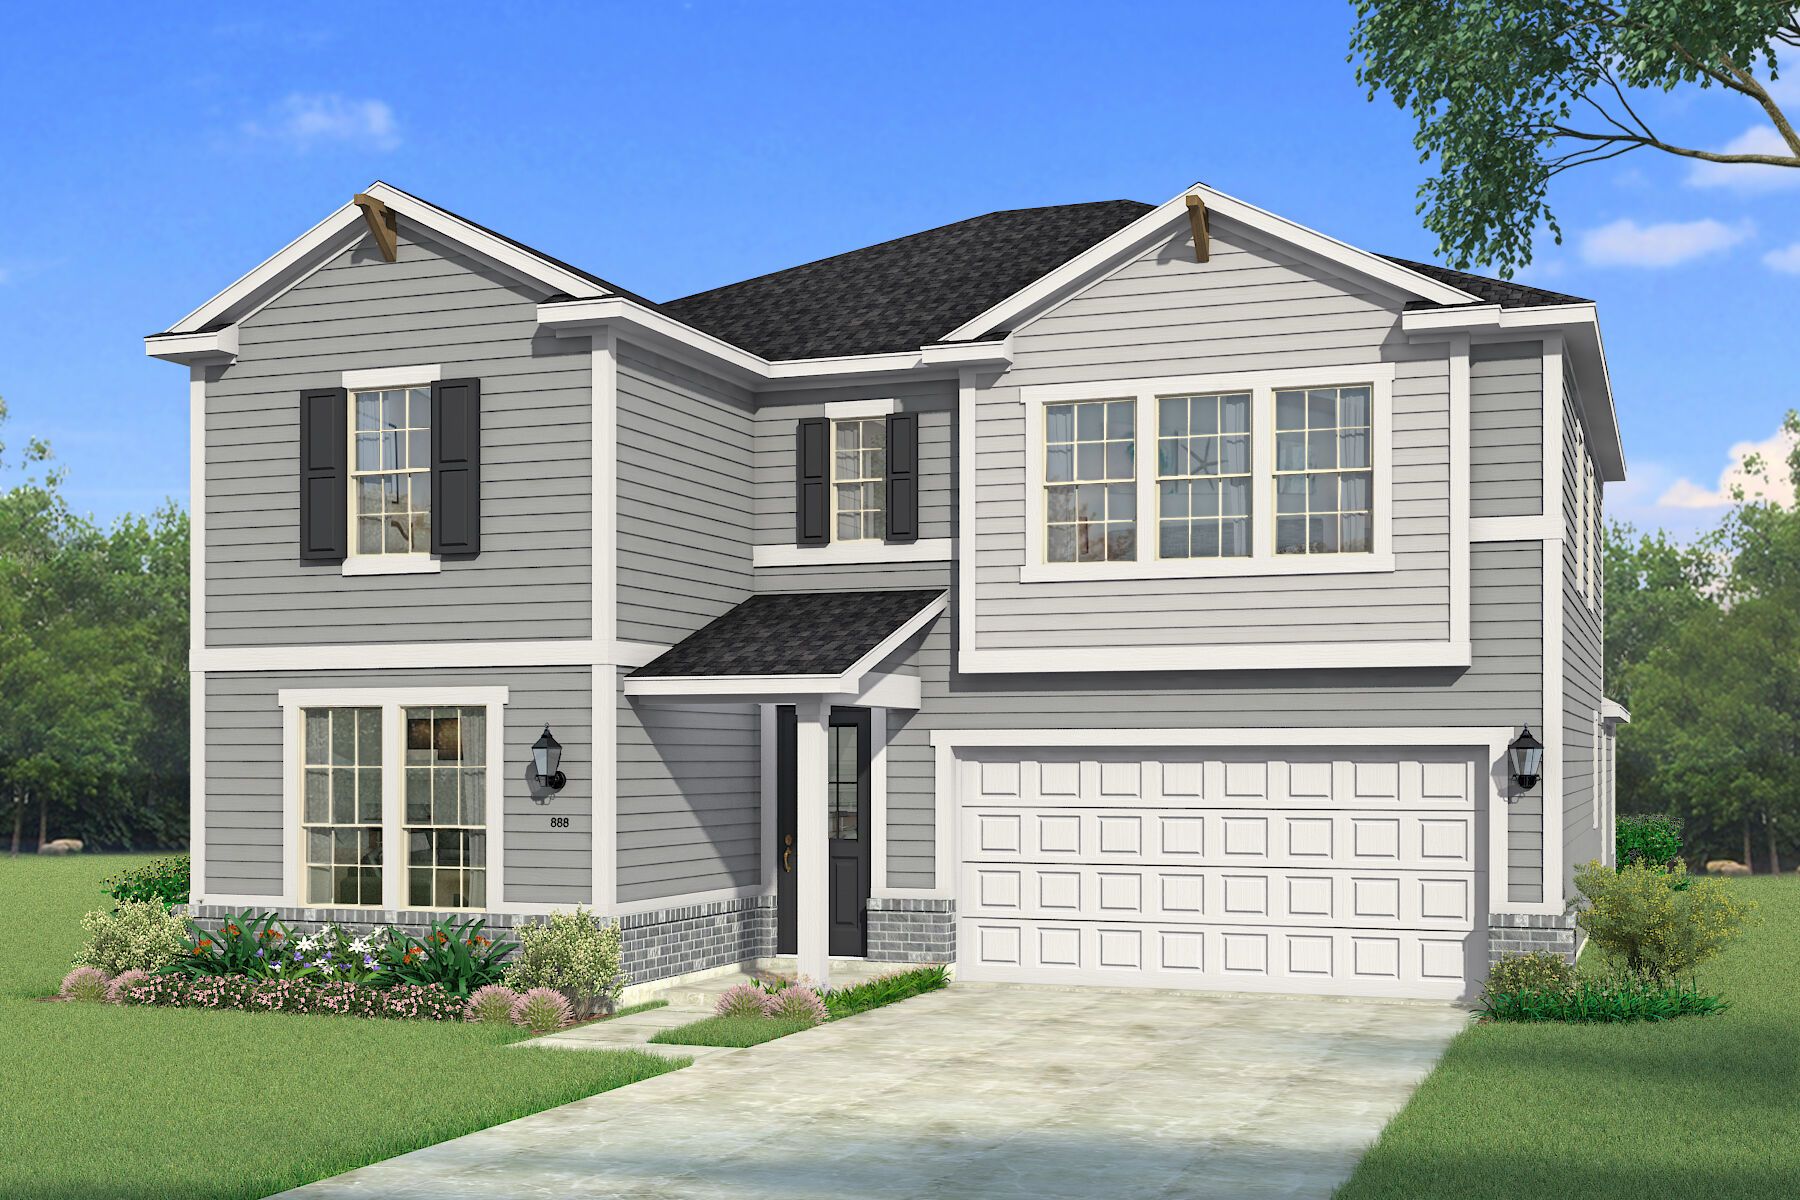 Exterior:The Tiana - Traditional 1 Elevation